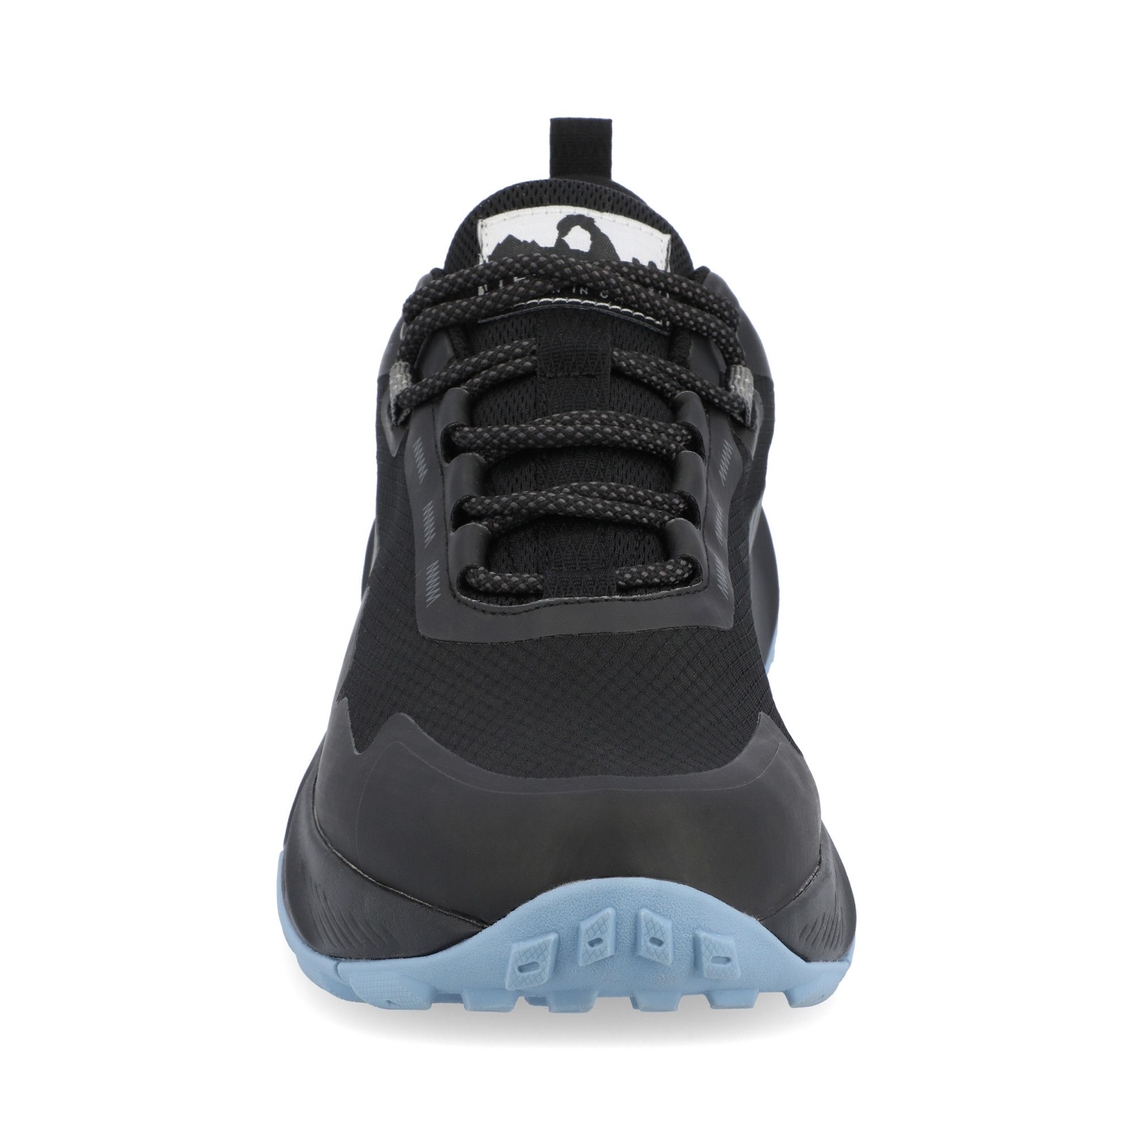 Territory Cascade Water Resistant Sneaker - Image 2 of 4